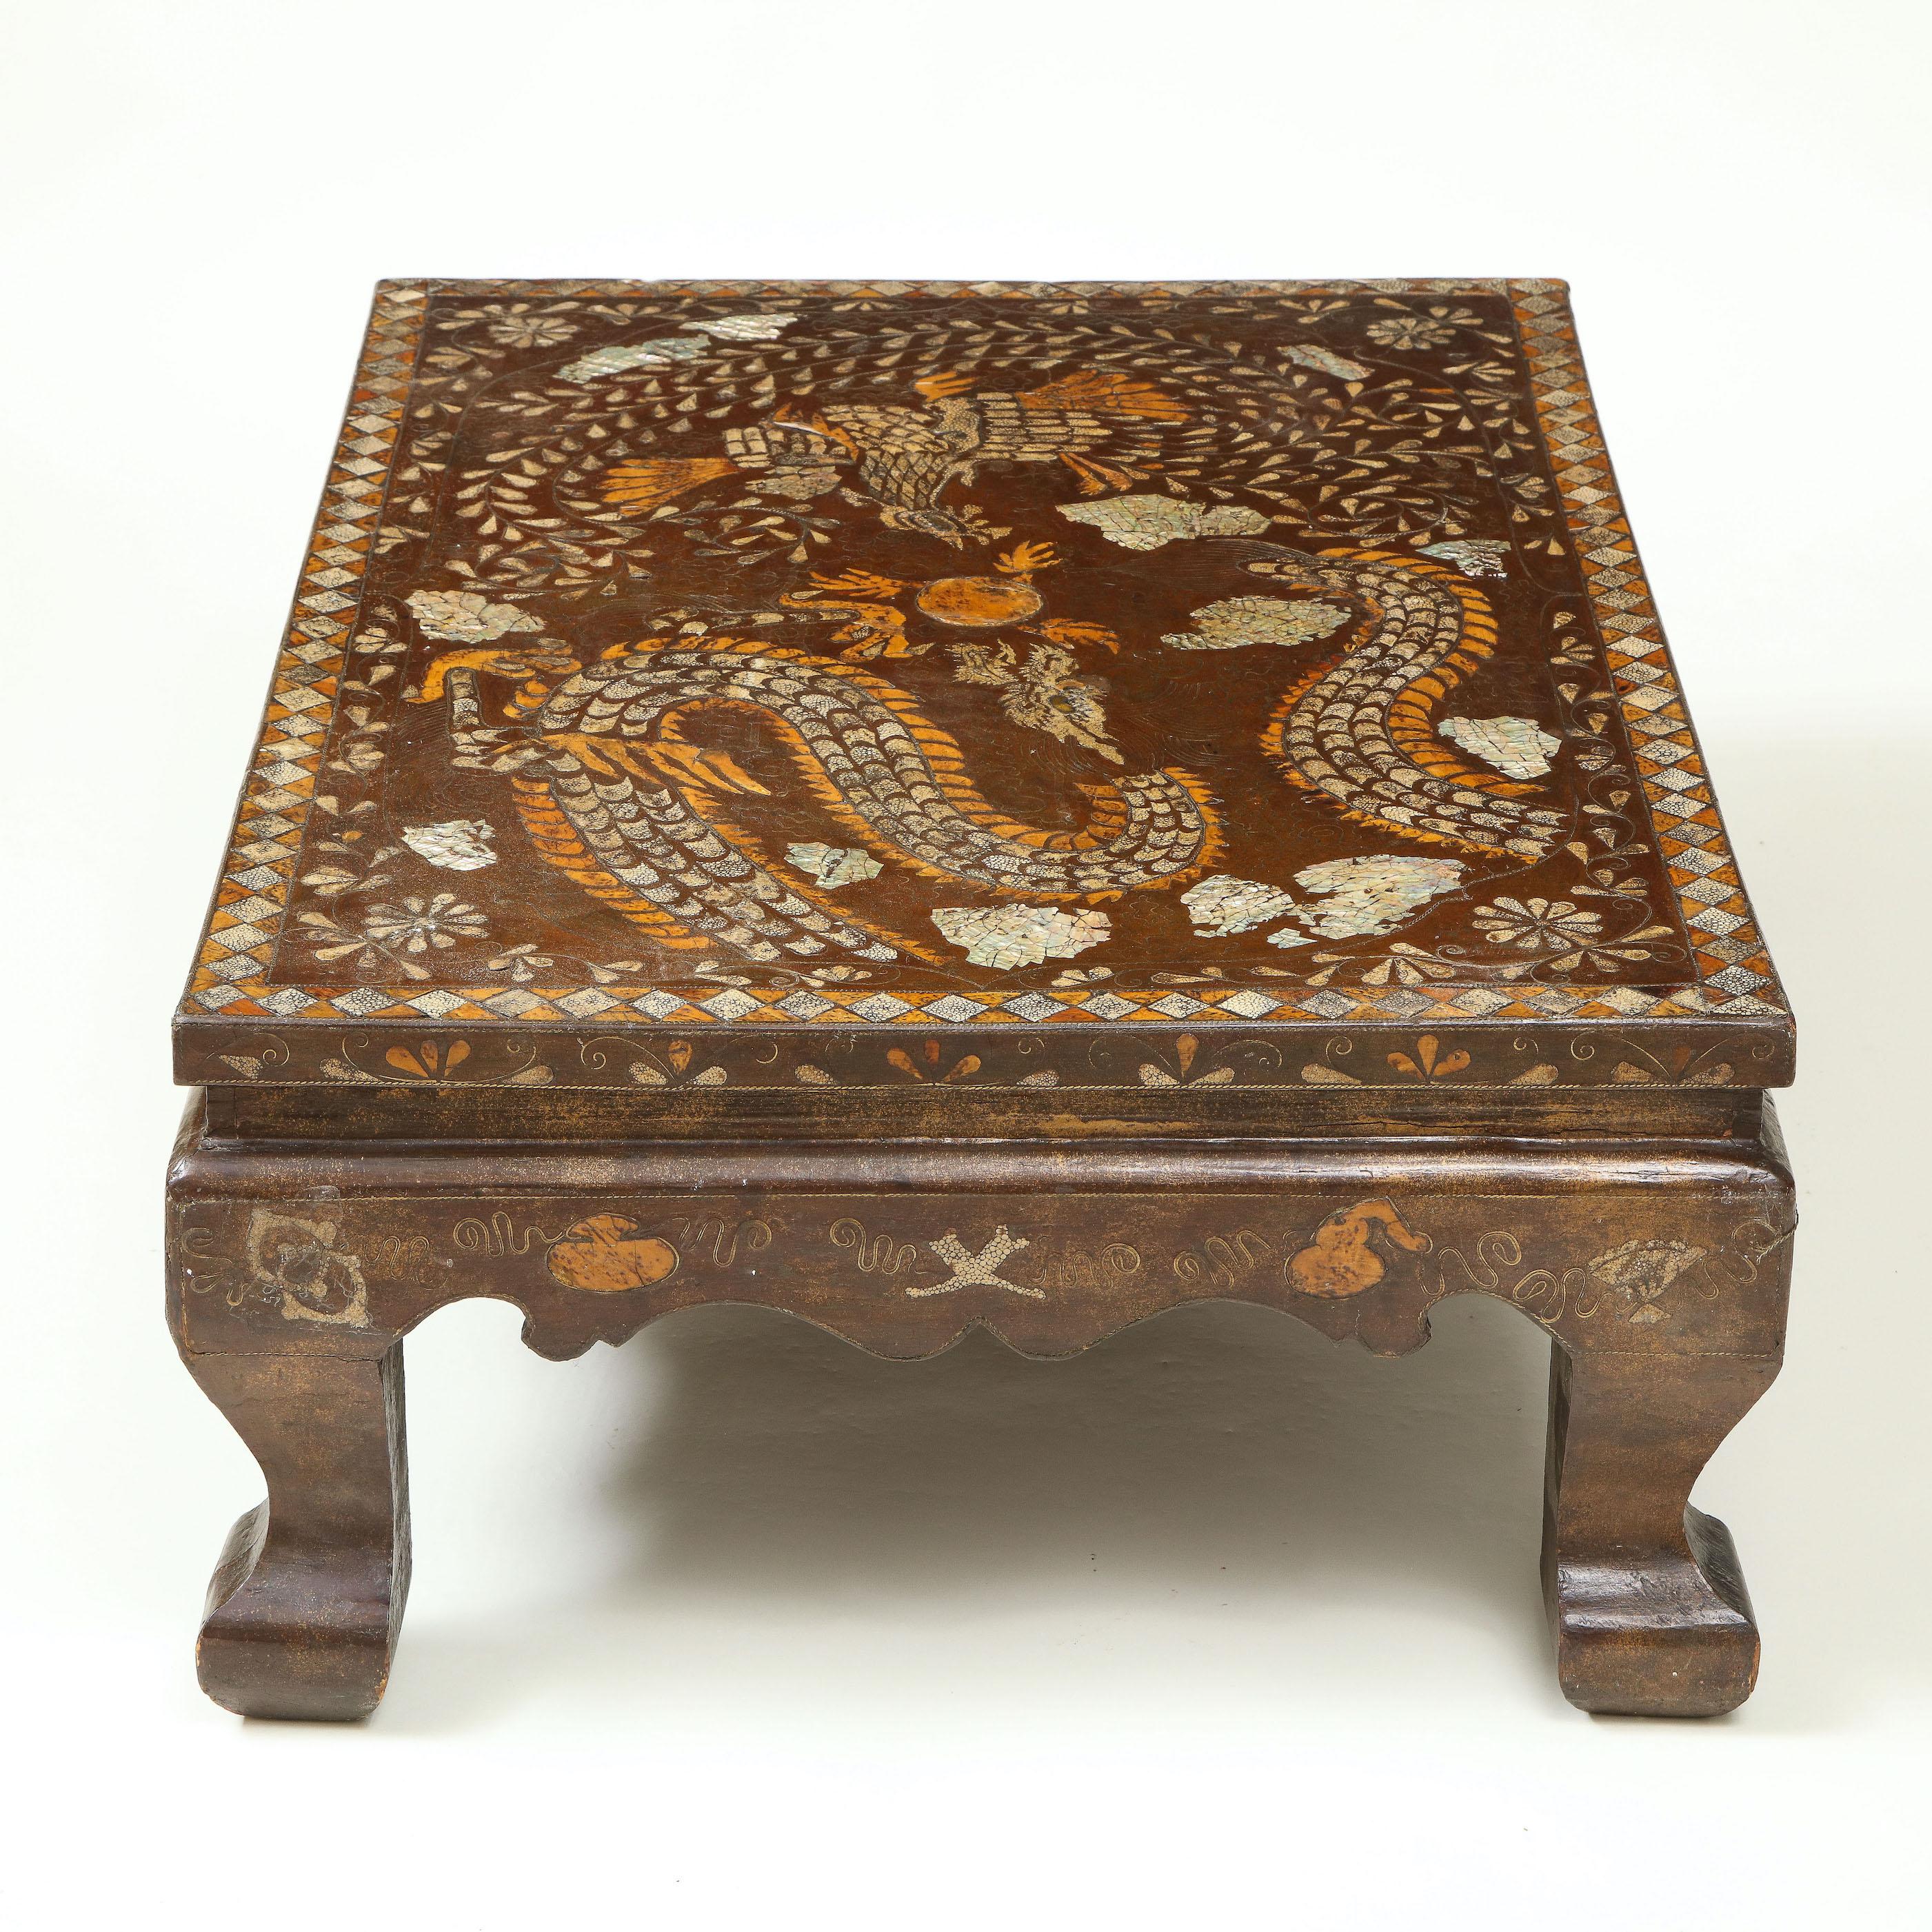 19th Century Brown Lacquer and Mother of Pearl Inlaid Low Table